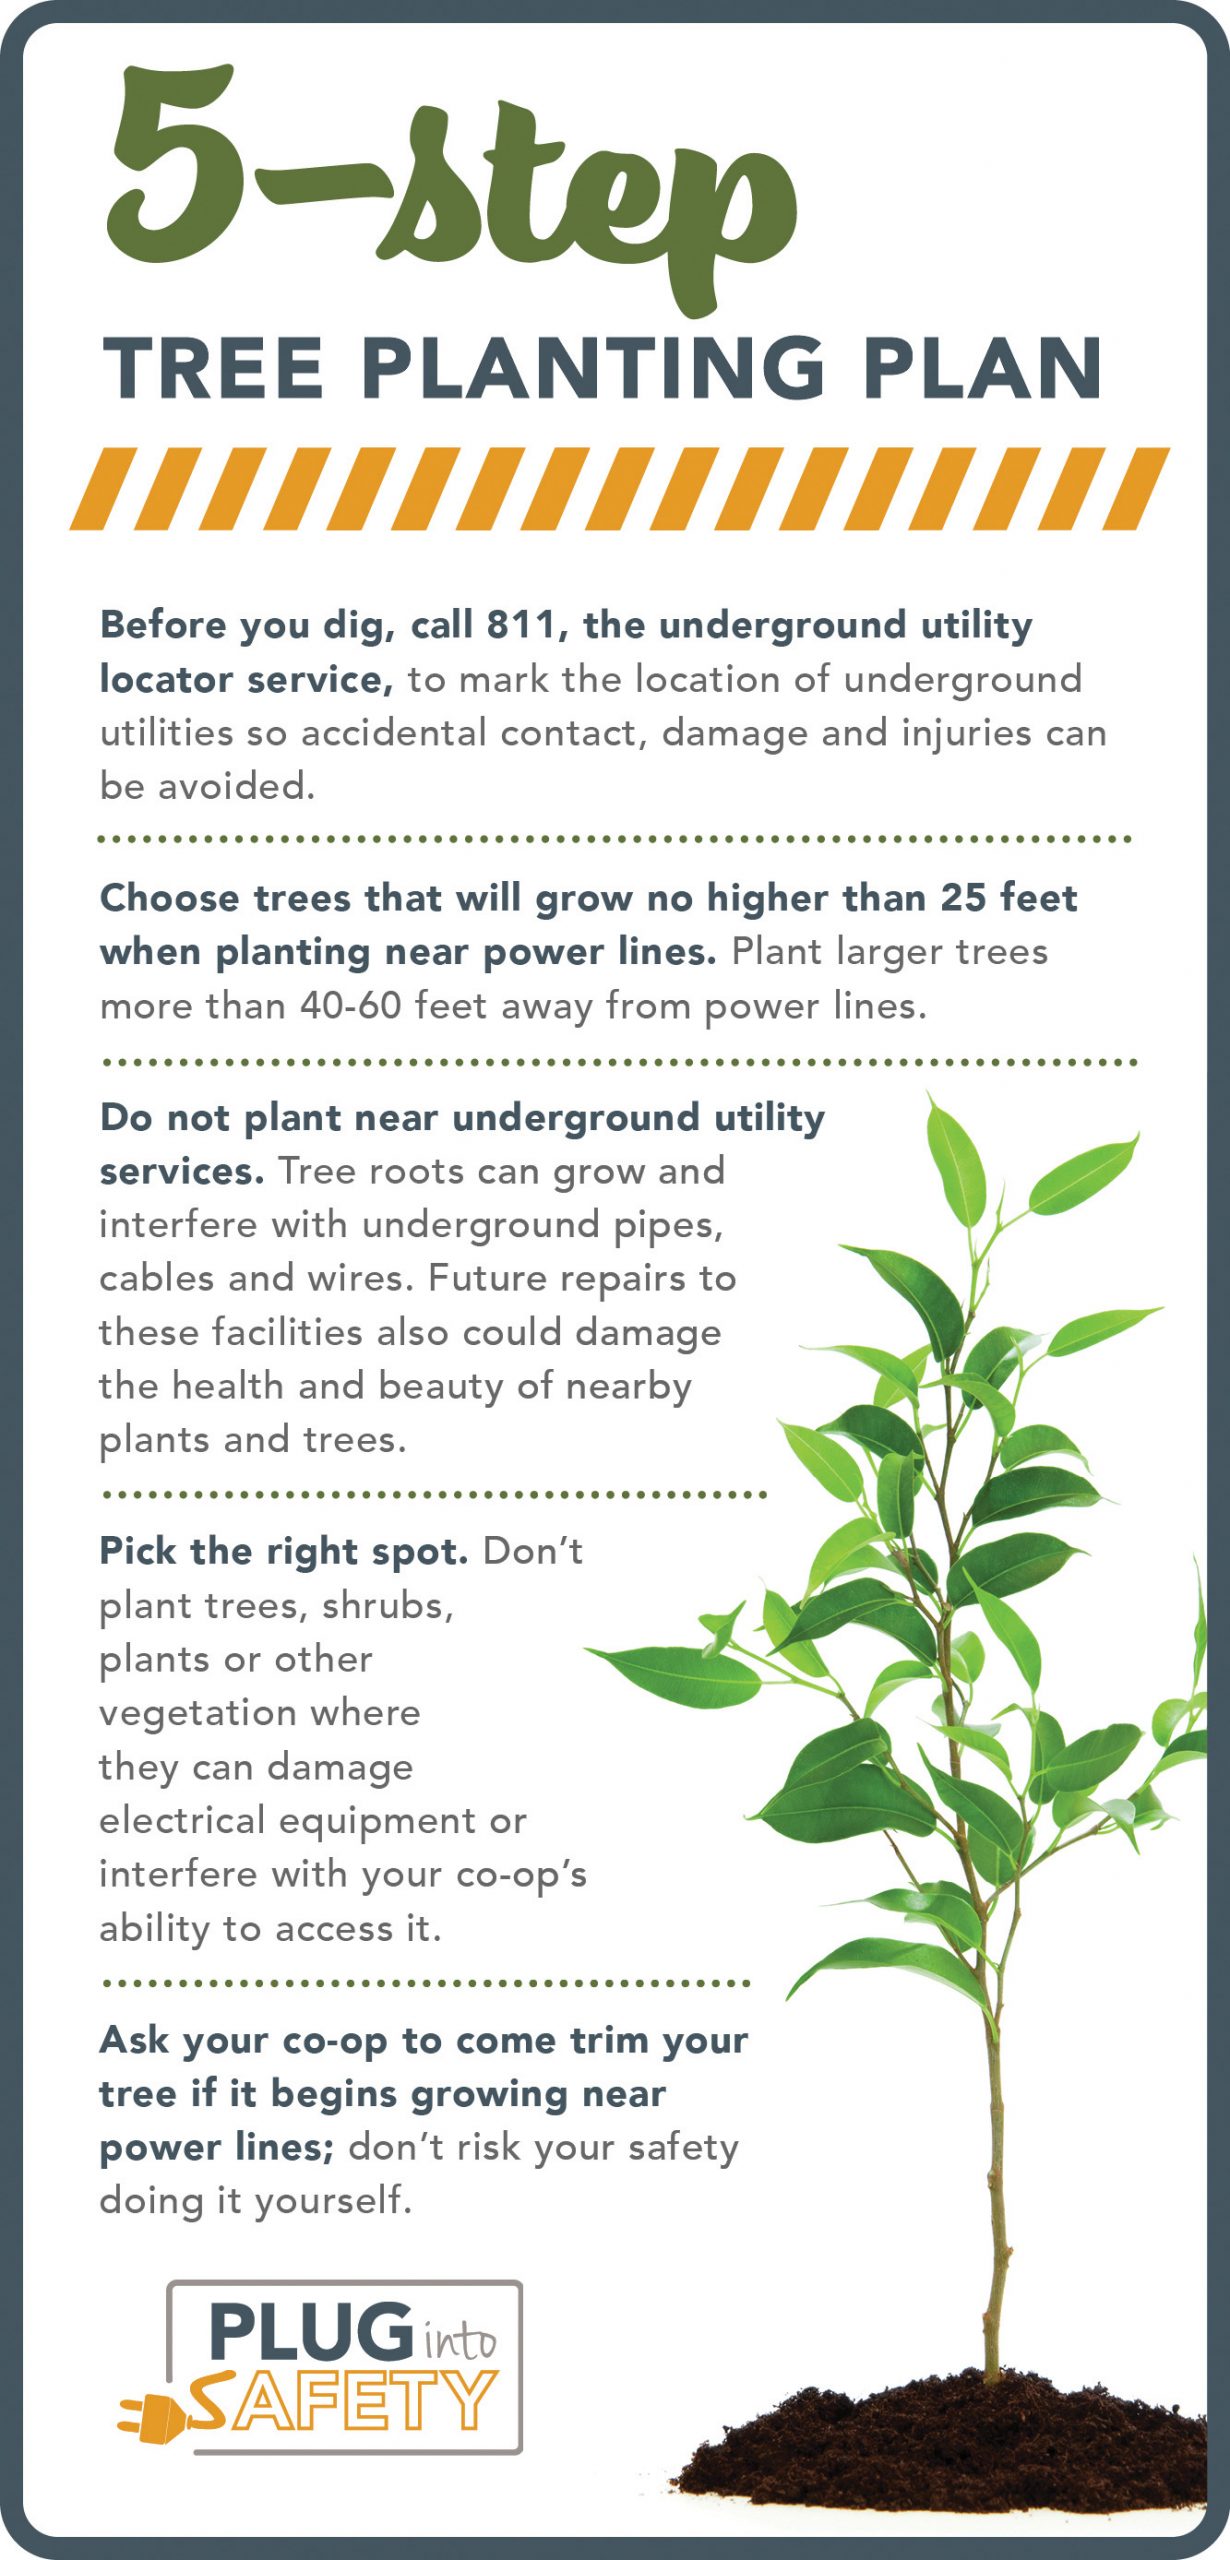 5step tree planting plan Indiana Connection